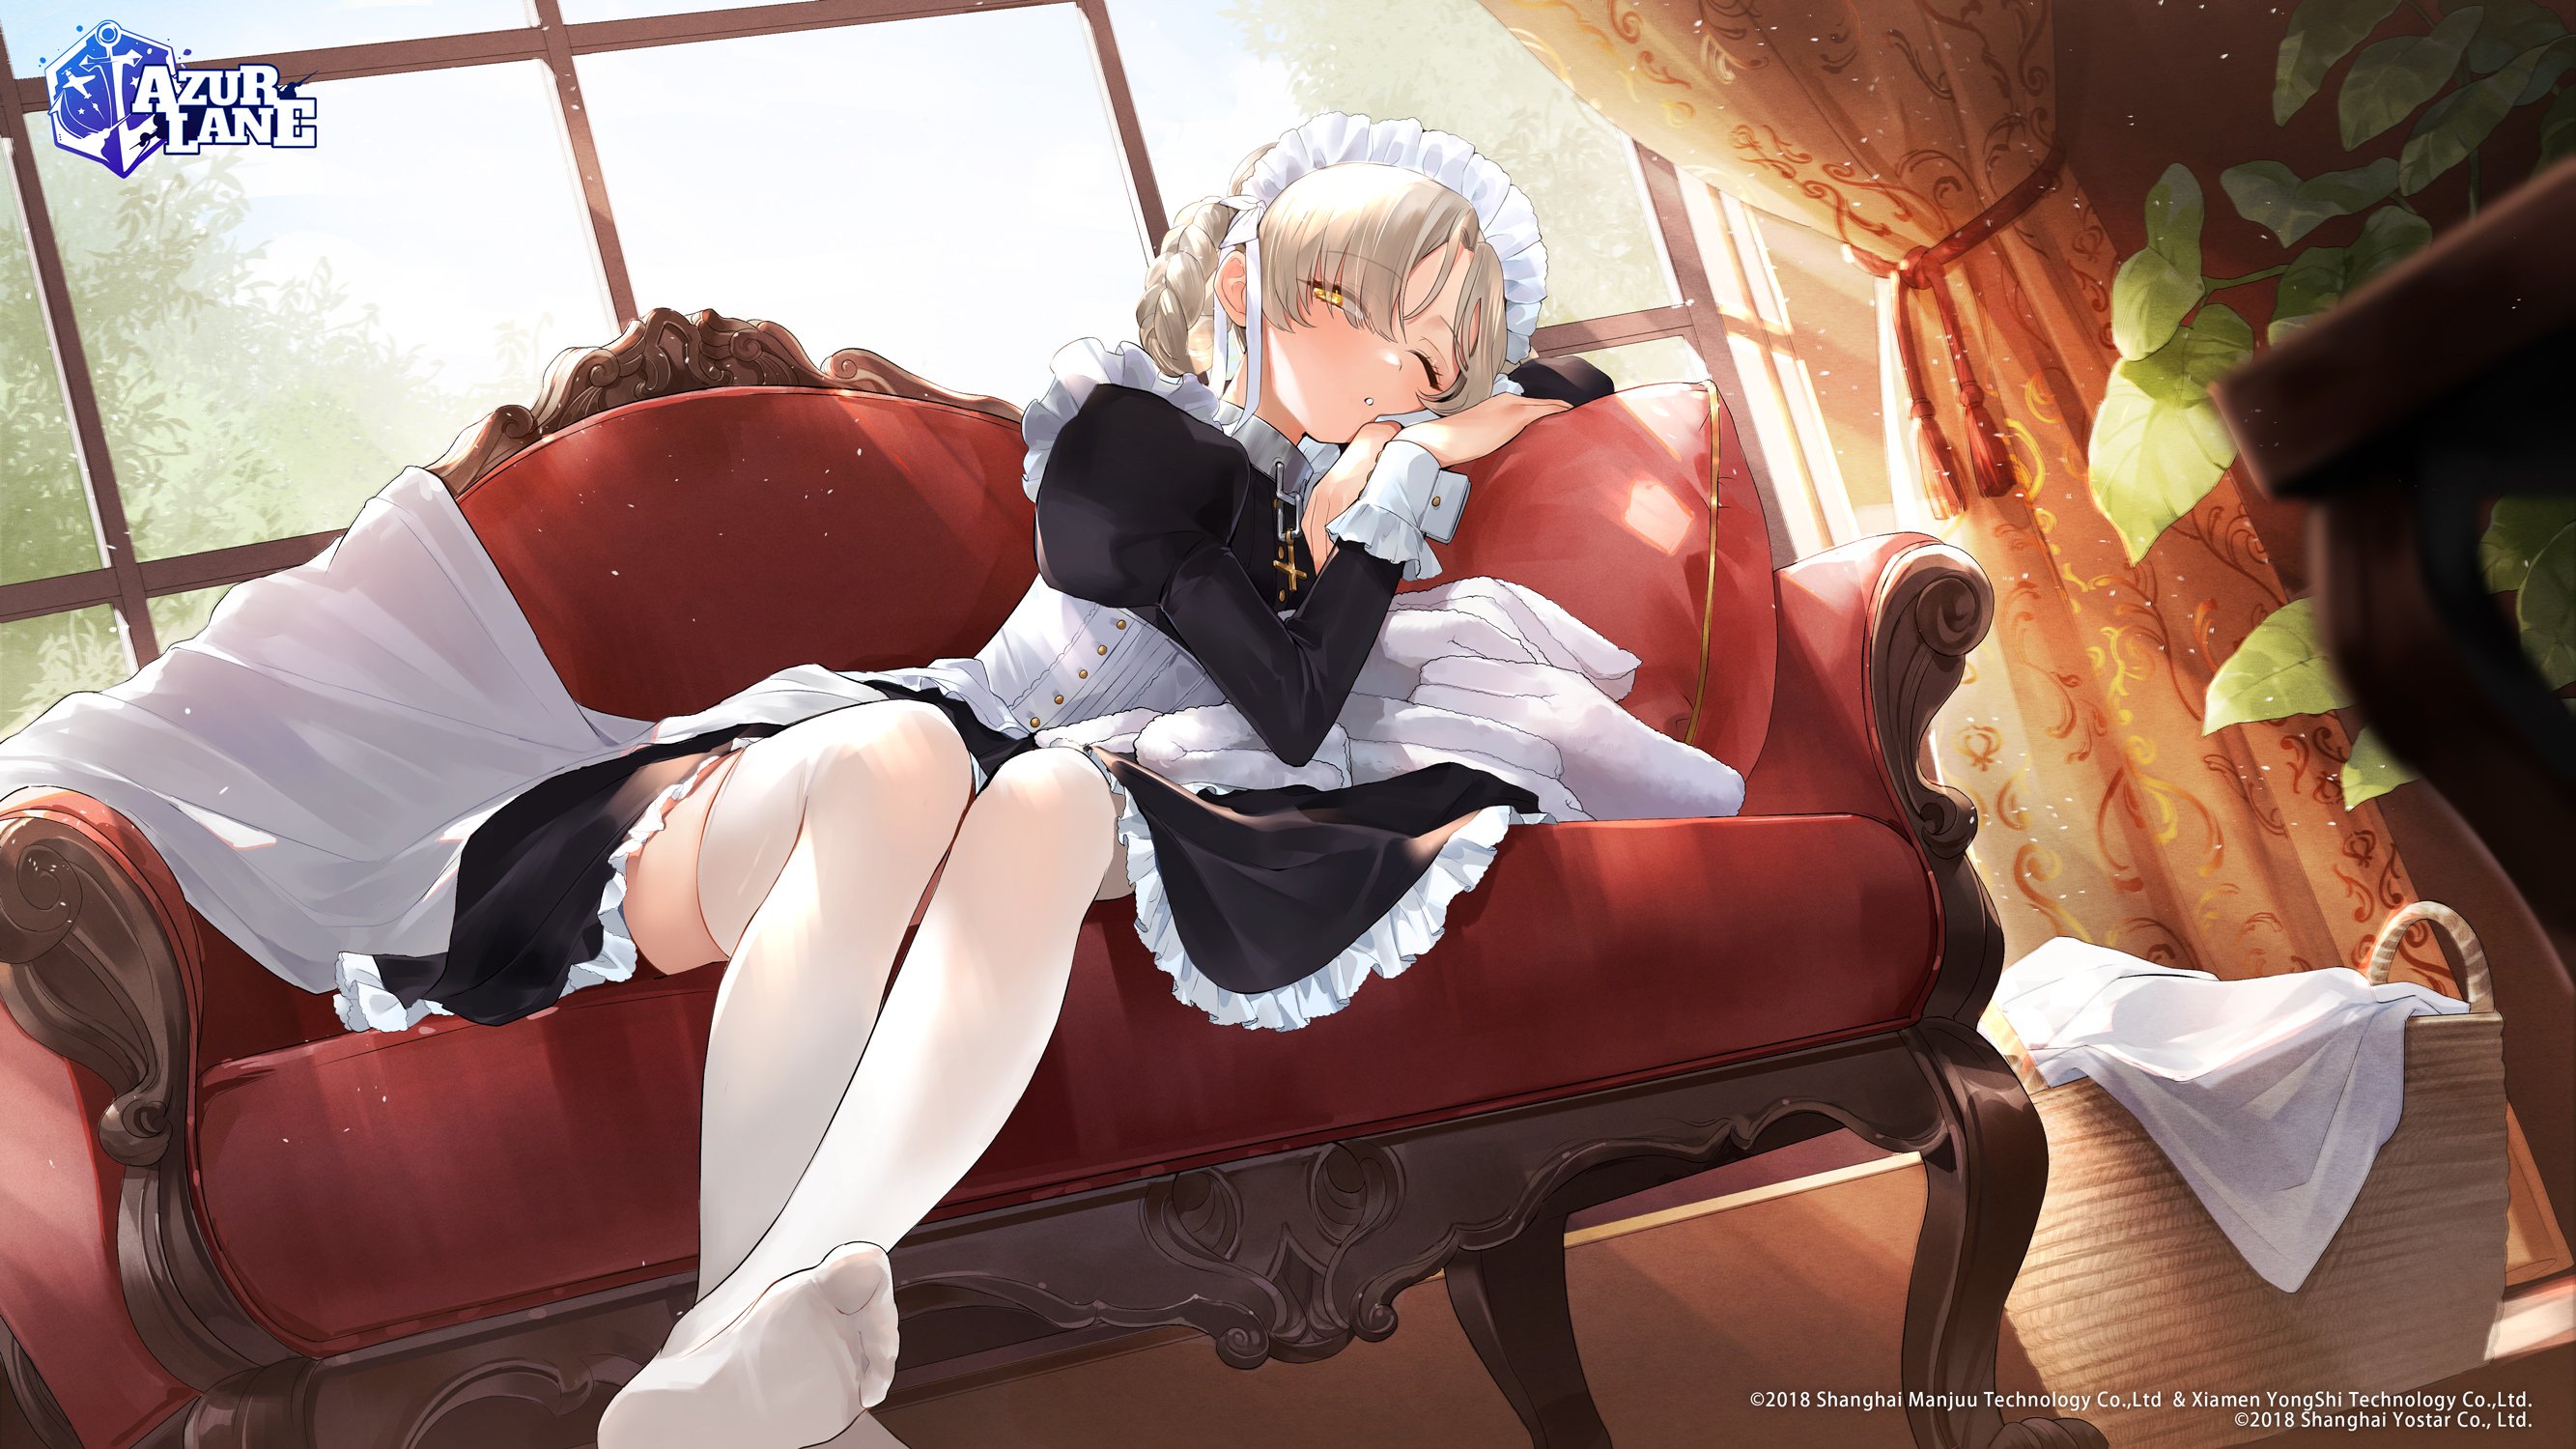 Sheffield Azur Lane Azur Lane Maid Outfit Anime Girls Sitting Couch Watermarked Logo One Eye Closed  2667x1500